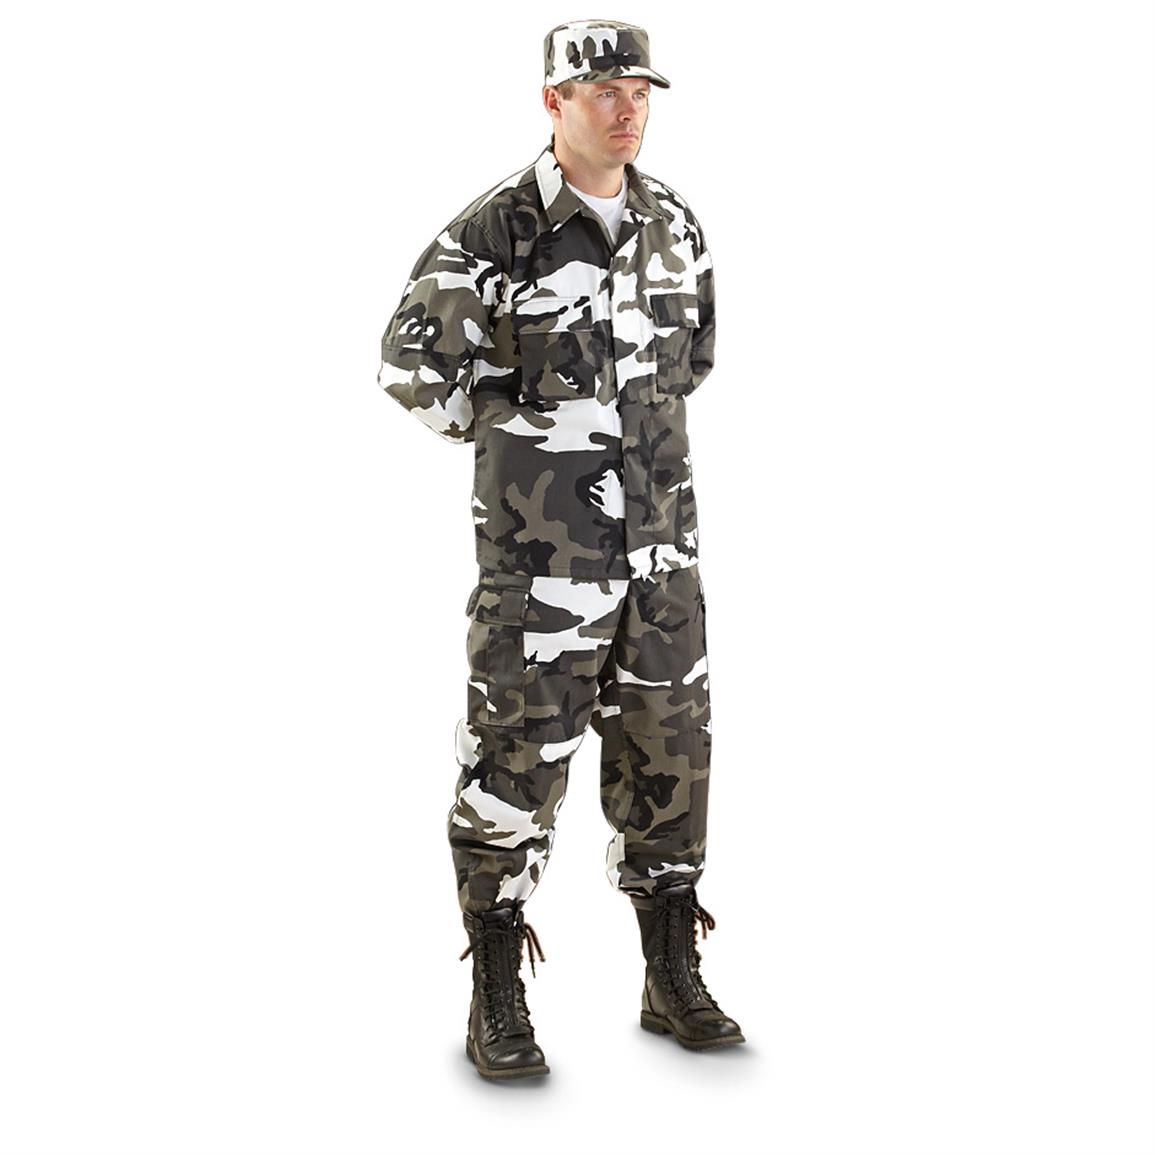 HQ ISSUE MIlitary-style BDU Shirt - 592442, Tactical Clothing at ...